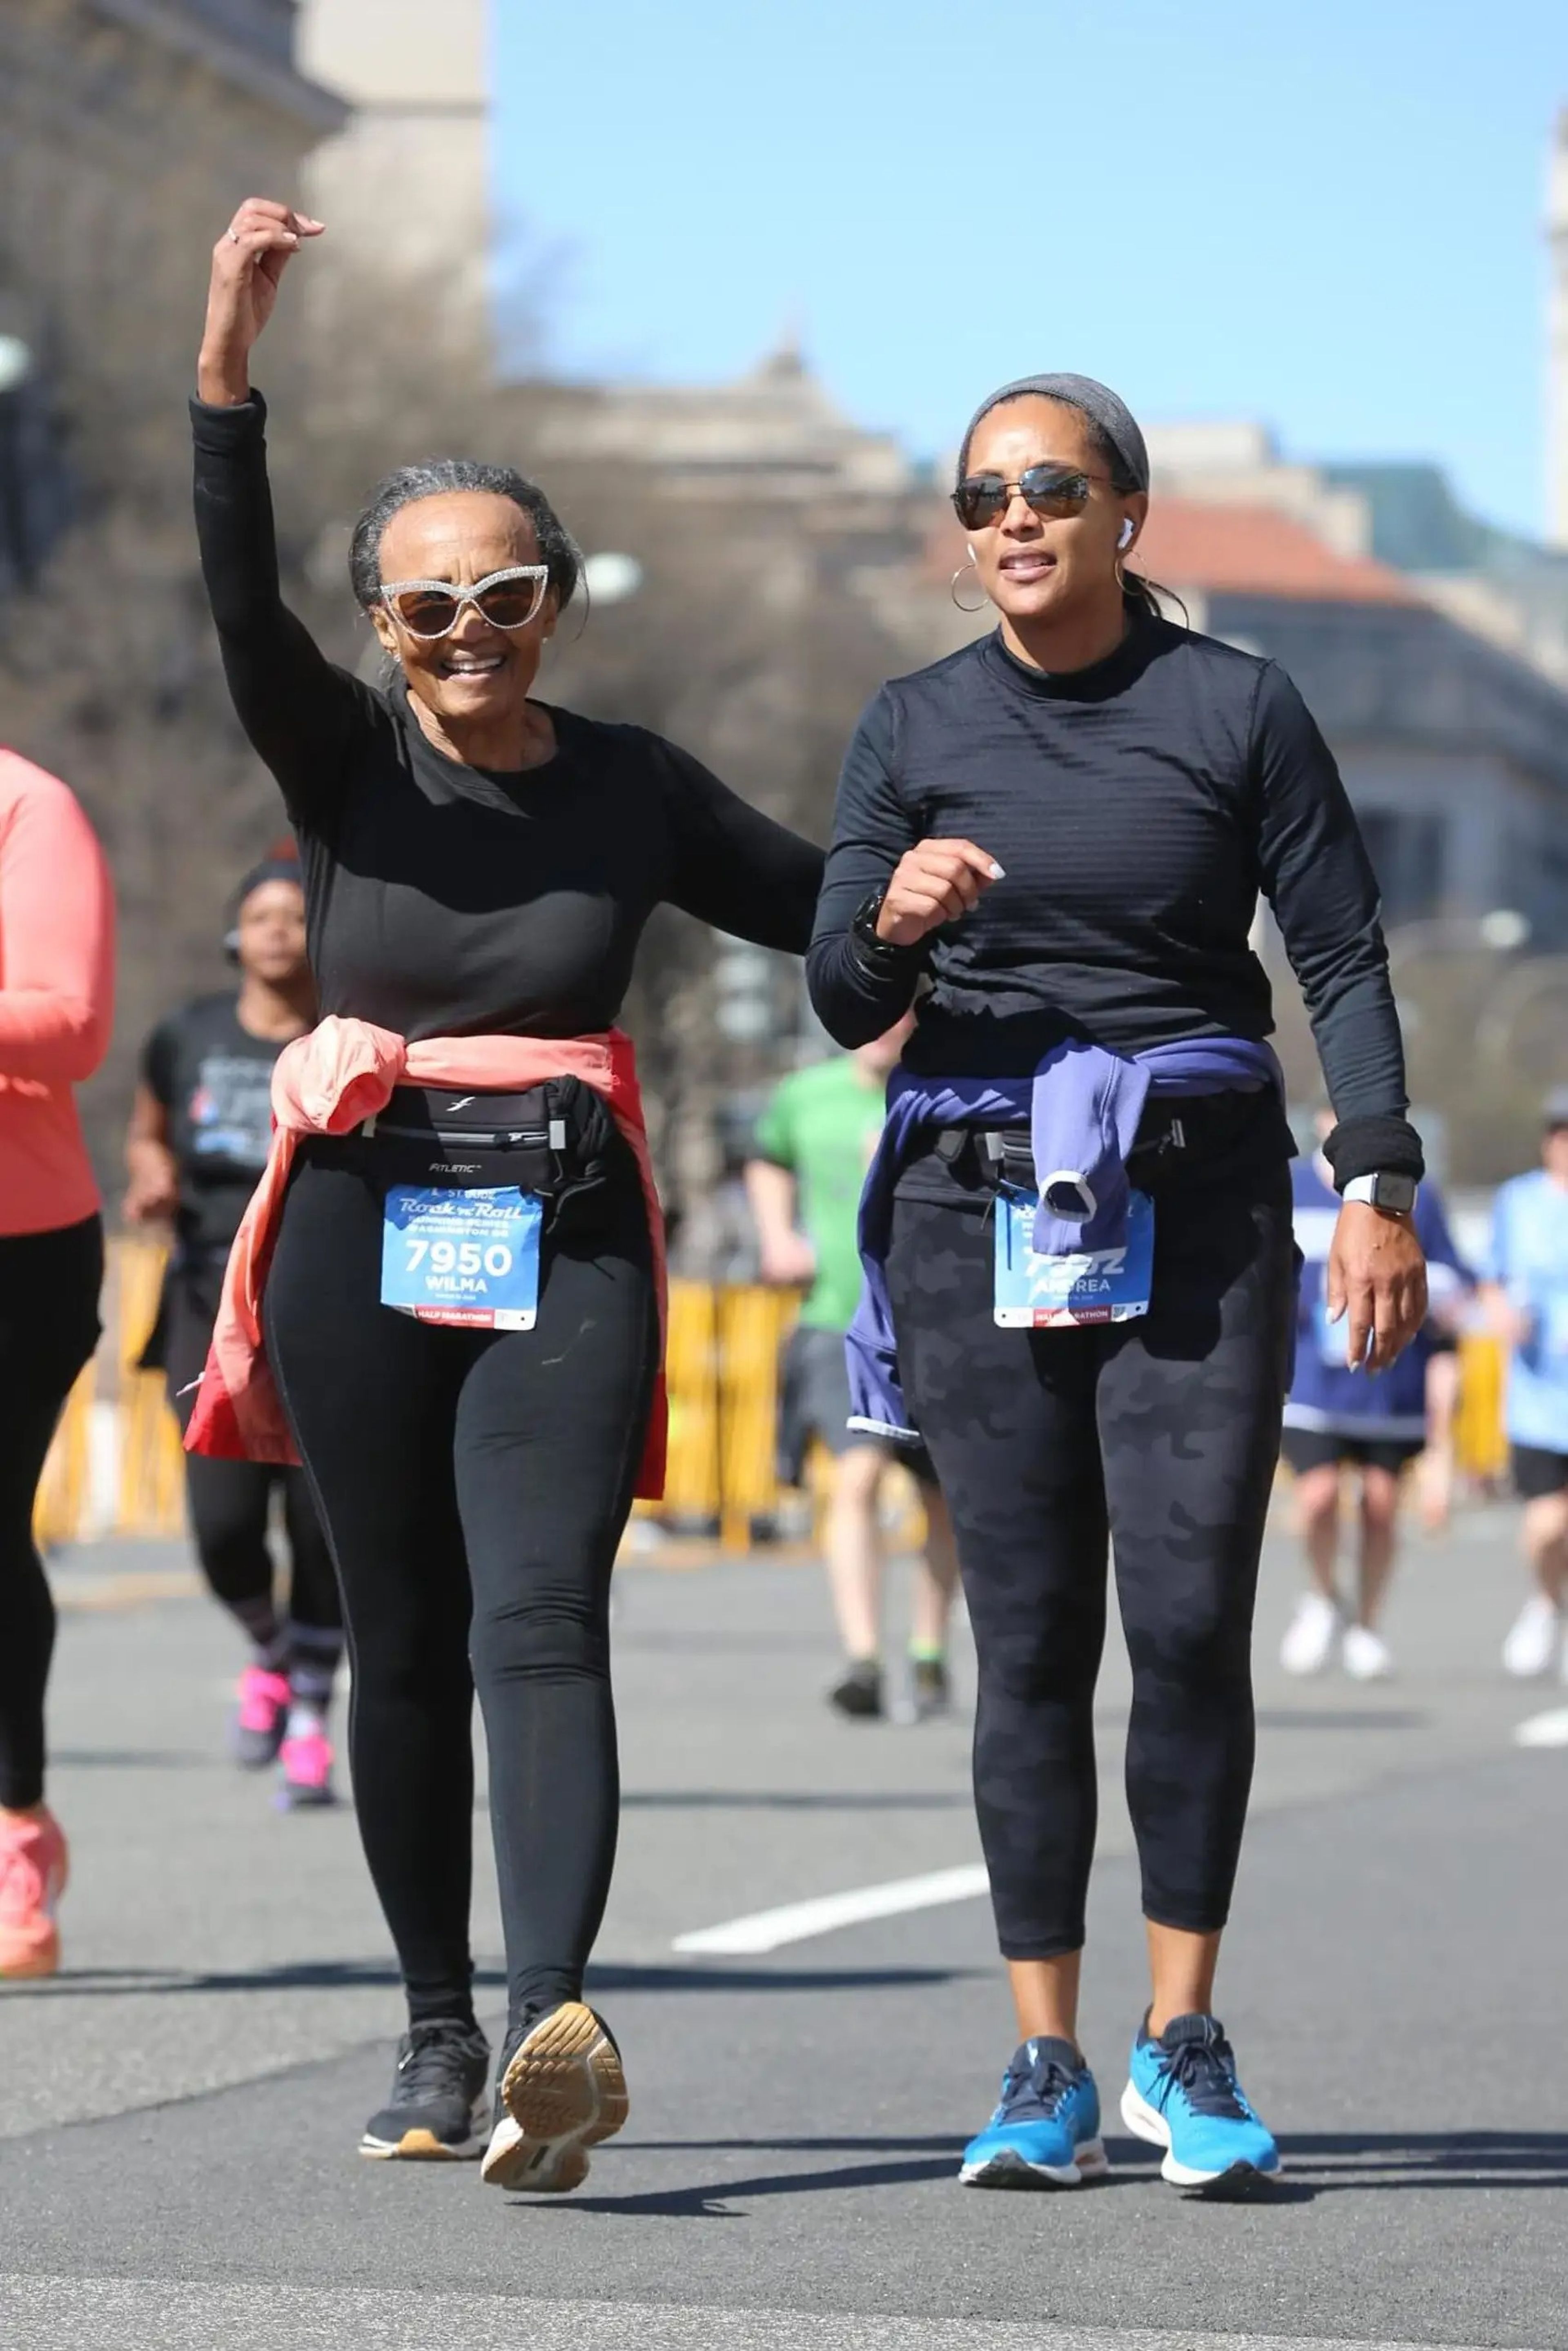 Two women in workout clothes, sunglasses, and race bibs on the road during a half marathon